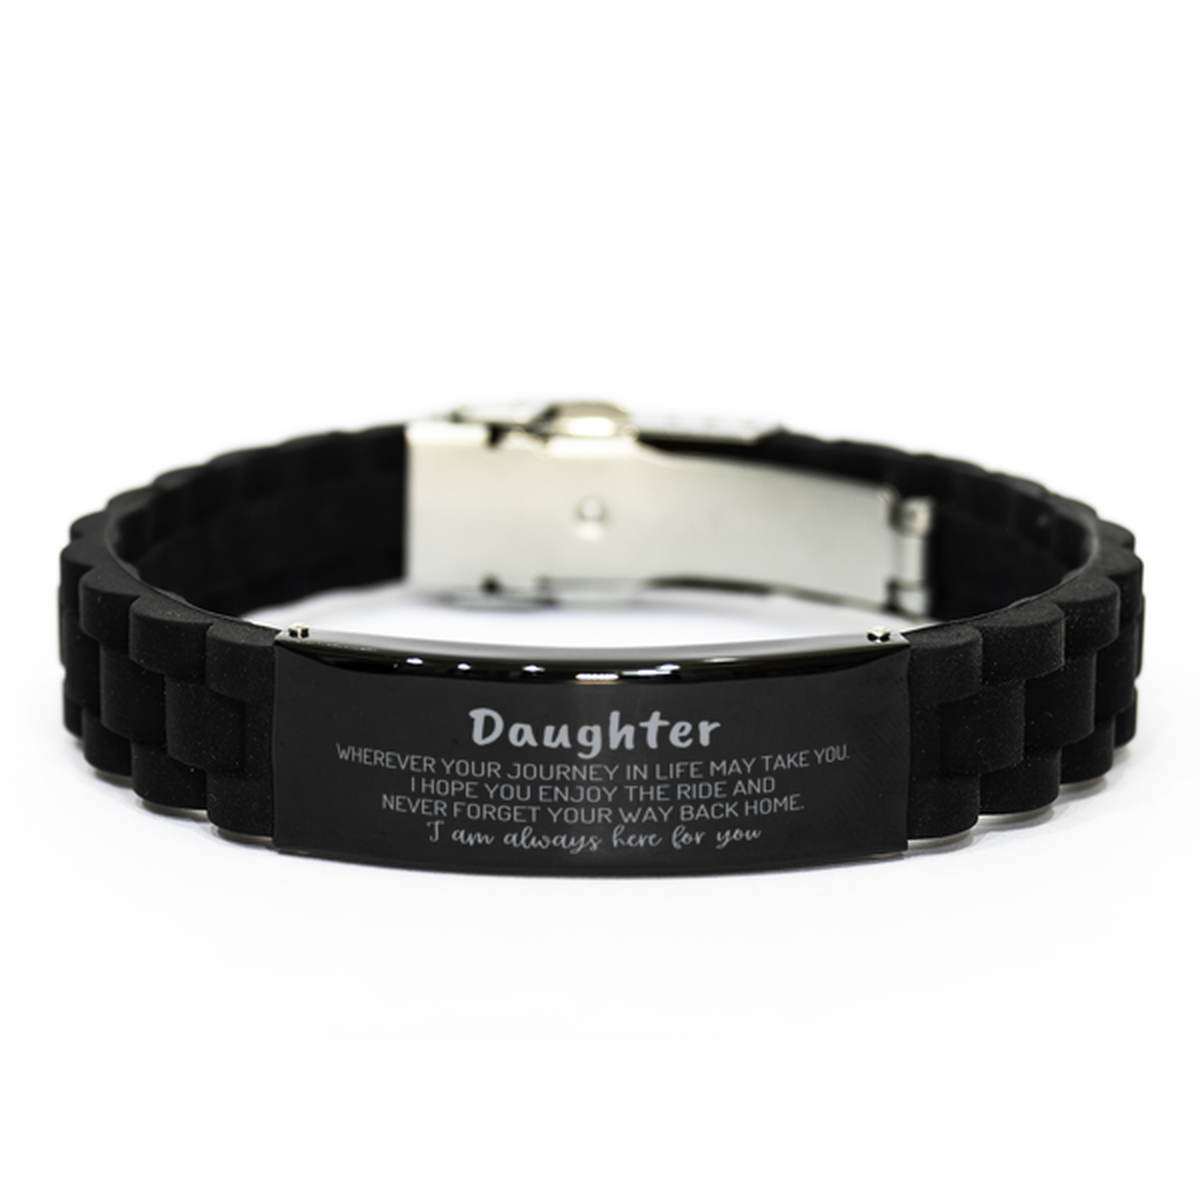 Daughter wherever your journey in life may take you, I am always here for you Daughter Black Glidelock Clasp Bracelet, Awesome Christmas Gifts For Daughter, Daughter Birthday Gifts for Men Women Family Loved One